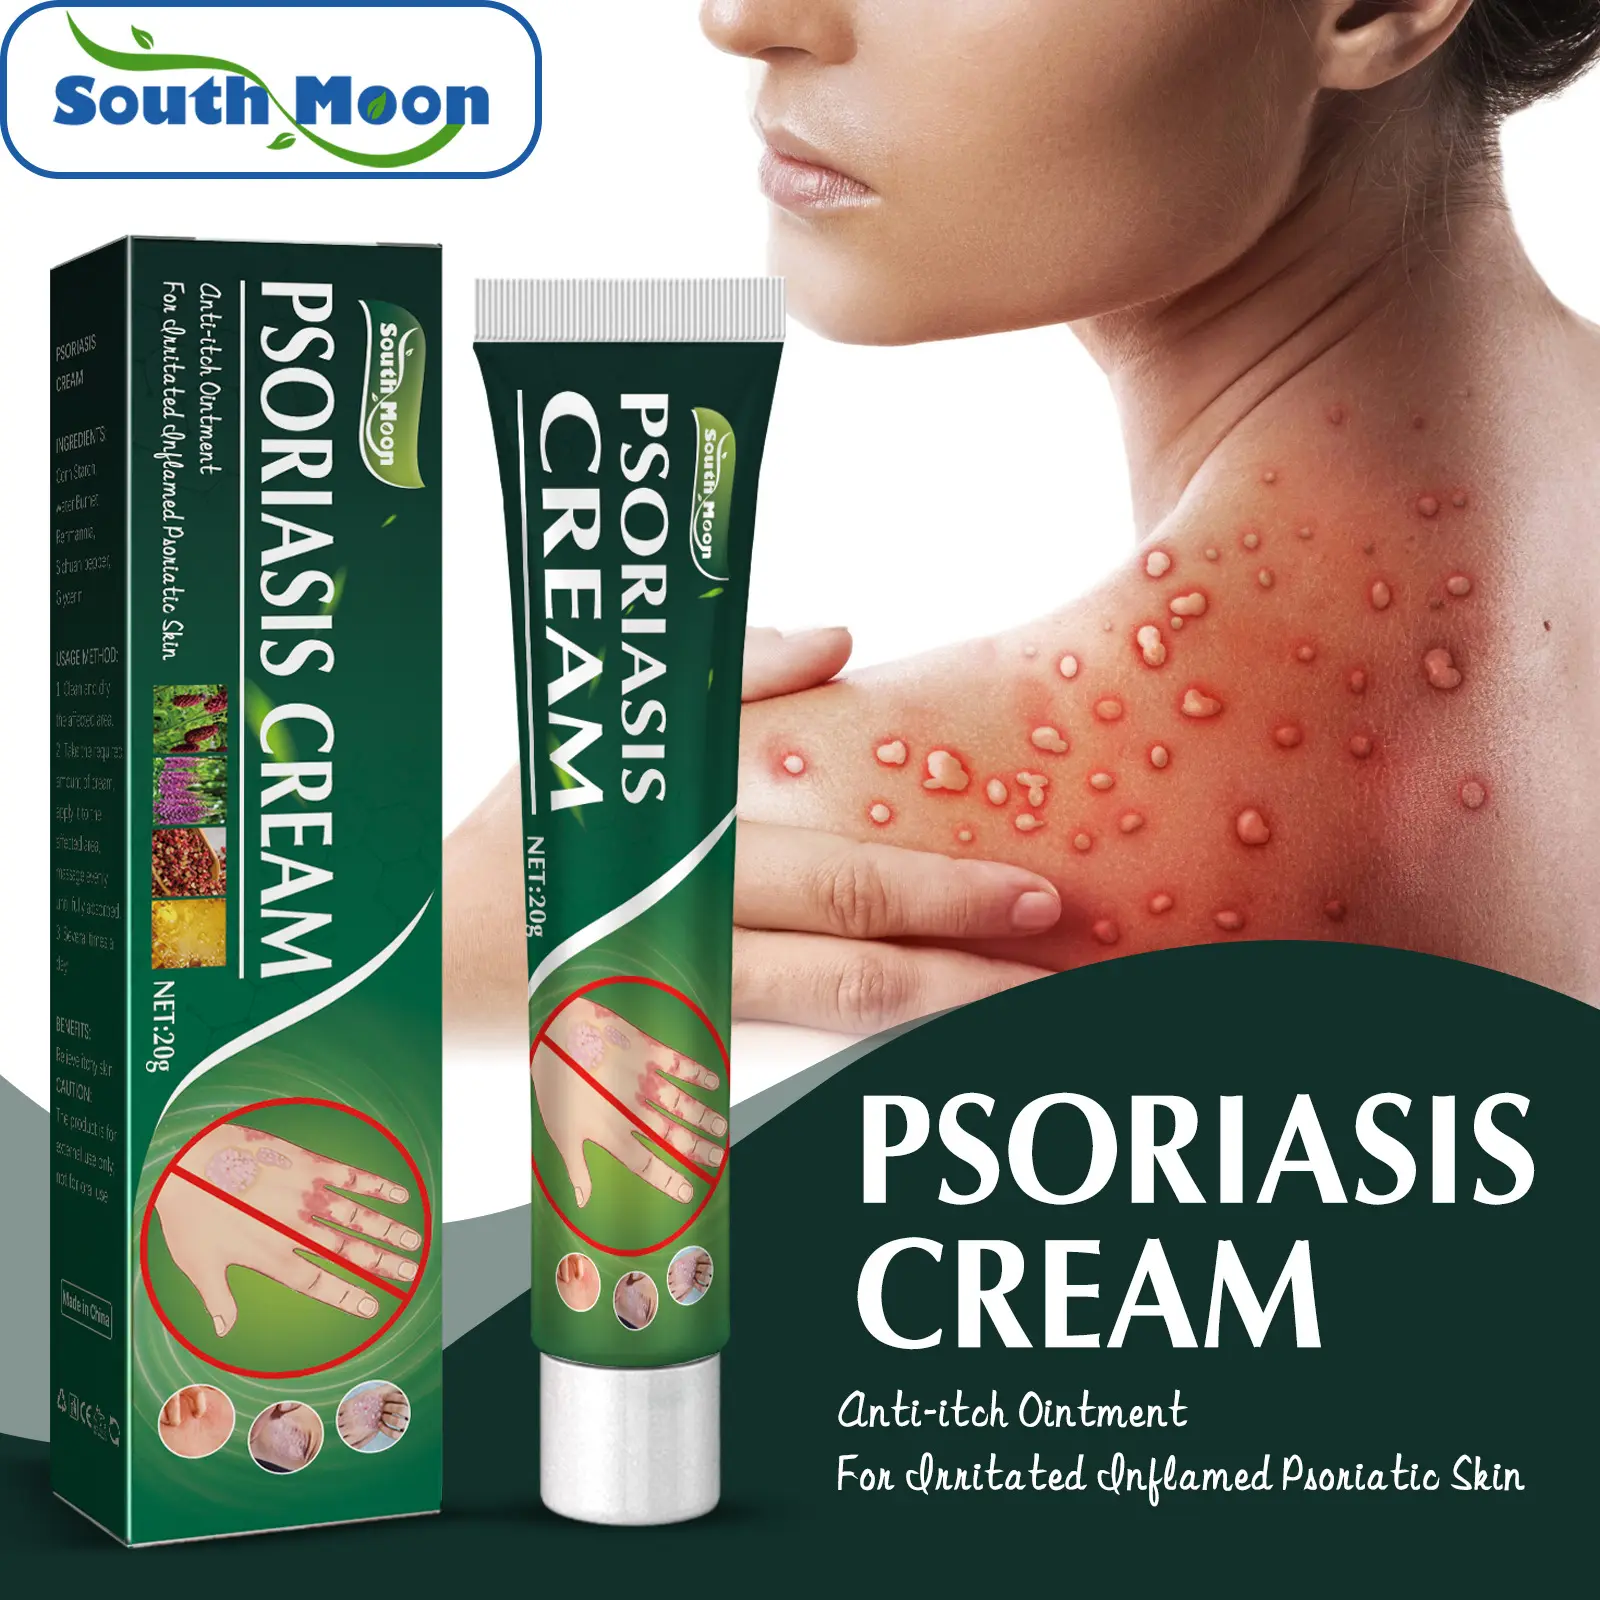 repair moss moss hand and foot moss to relieve itching cream skin topical ointment